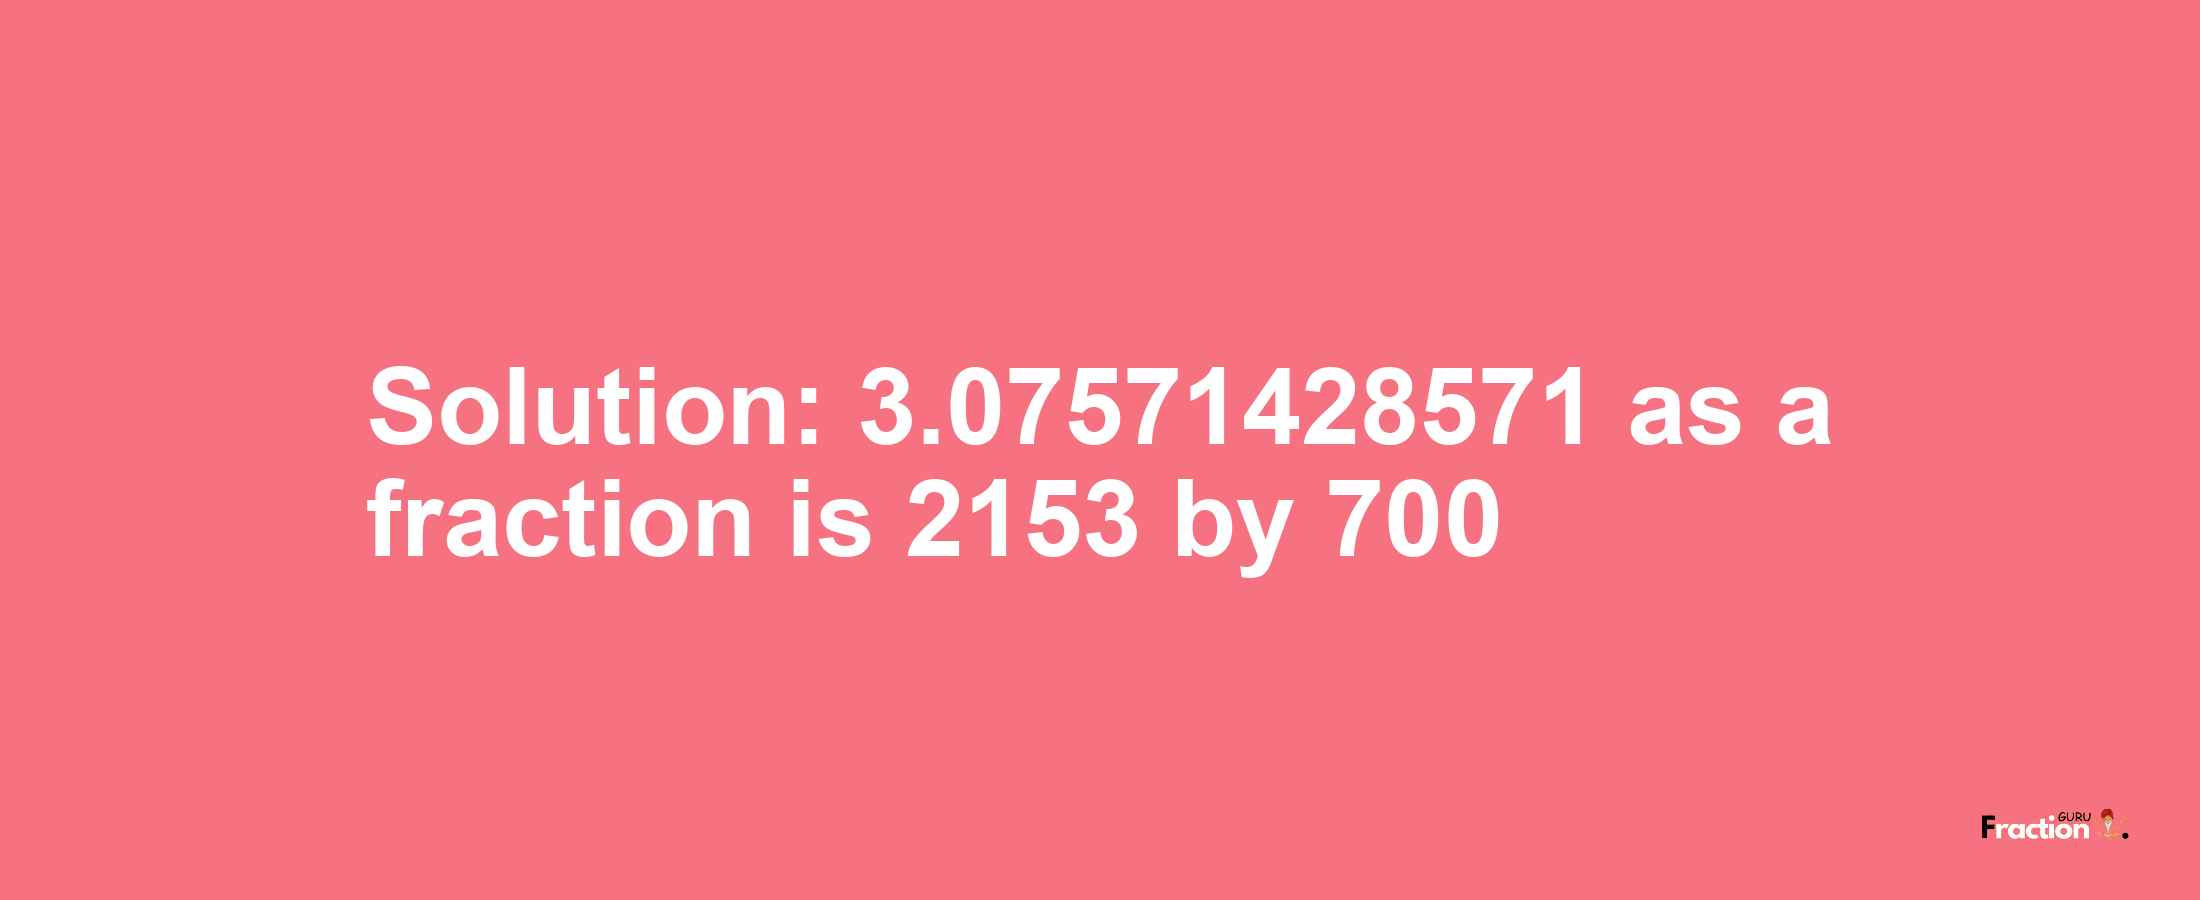 Solution:3.07571428571 as a fraction is 2153/700